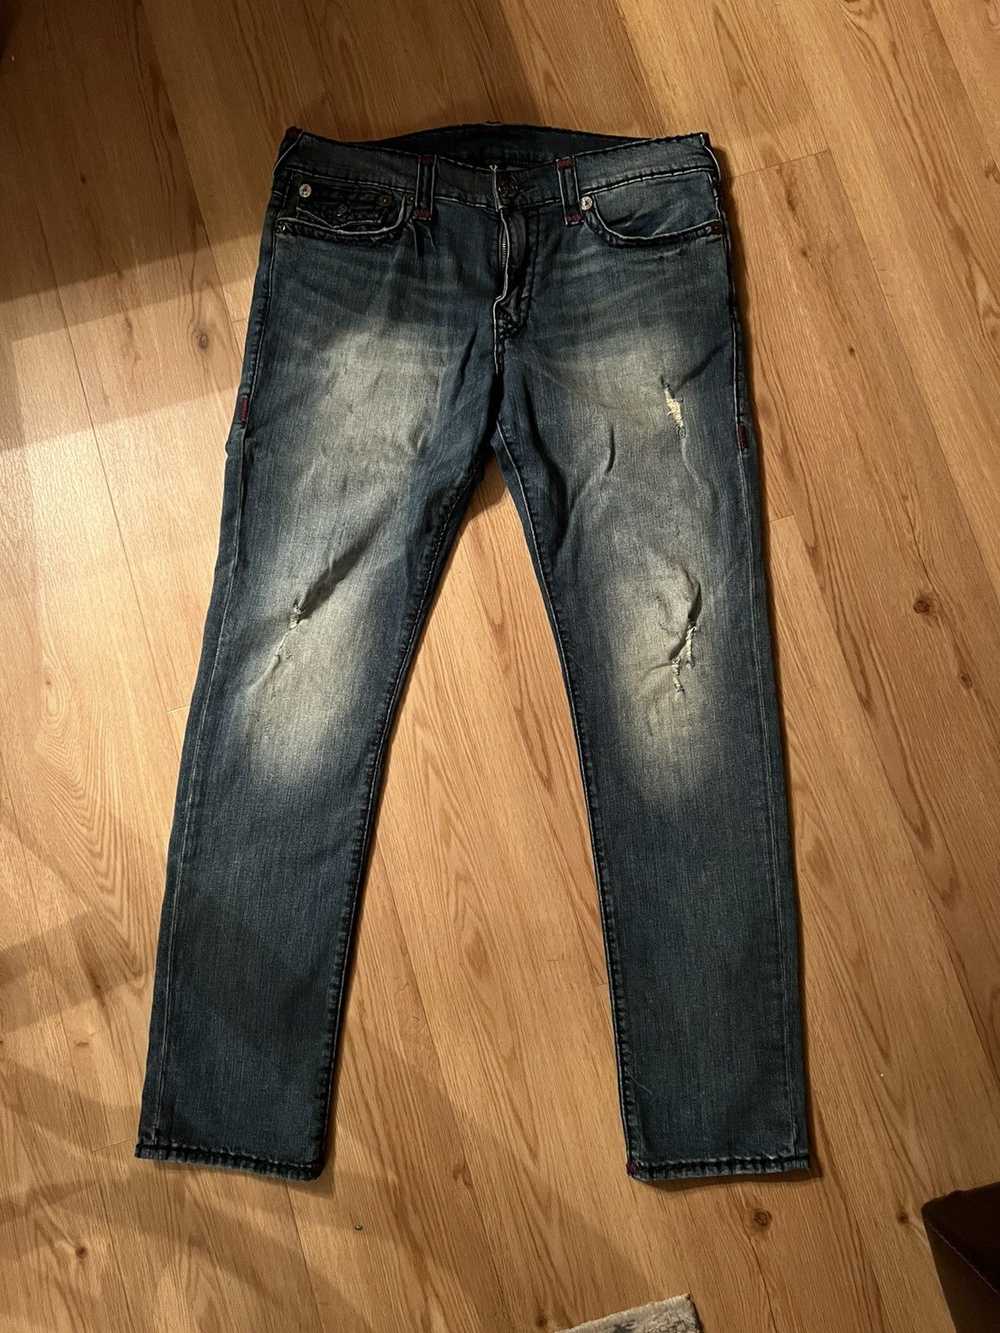 True Religion “Geno” Relaxed Slim size 36 - image 2